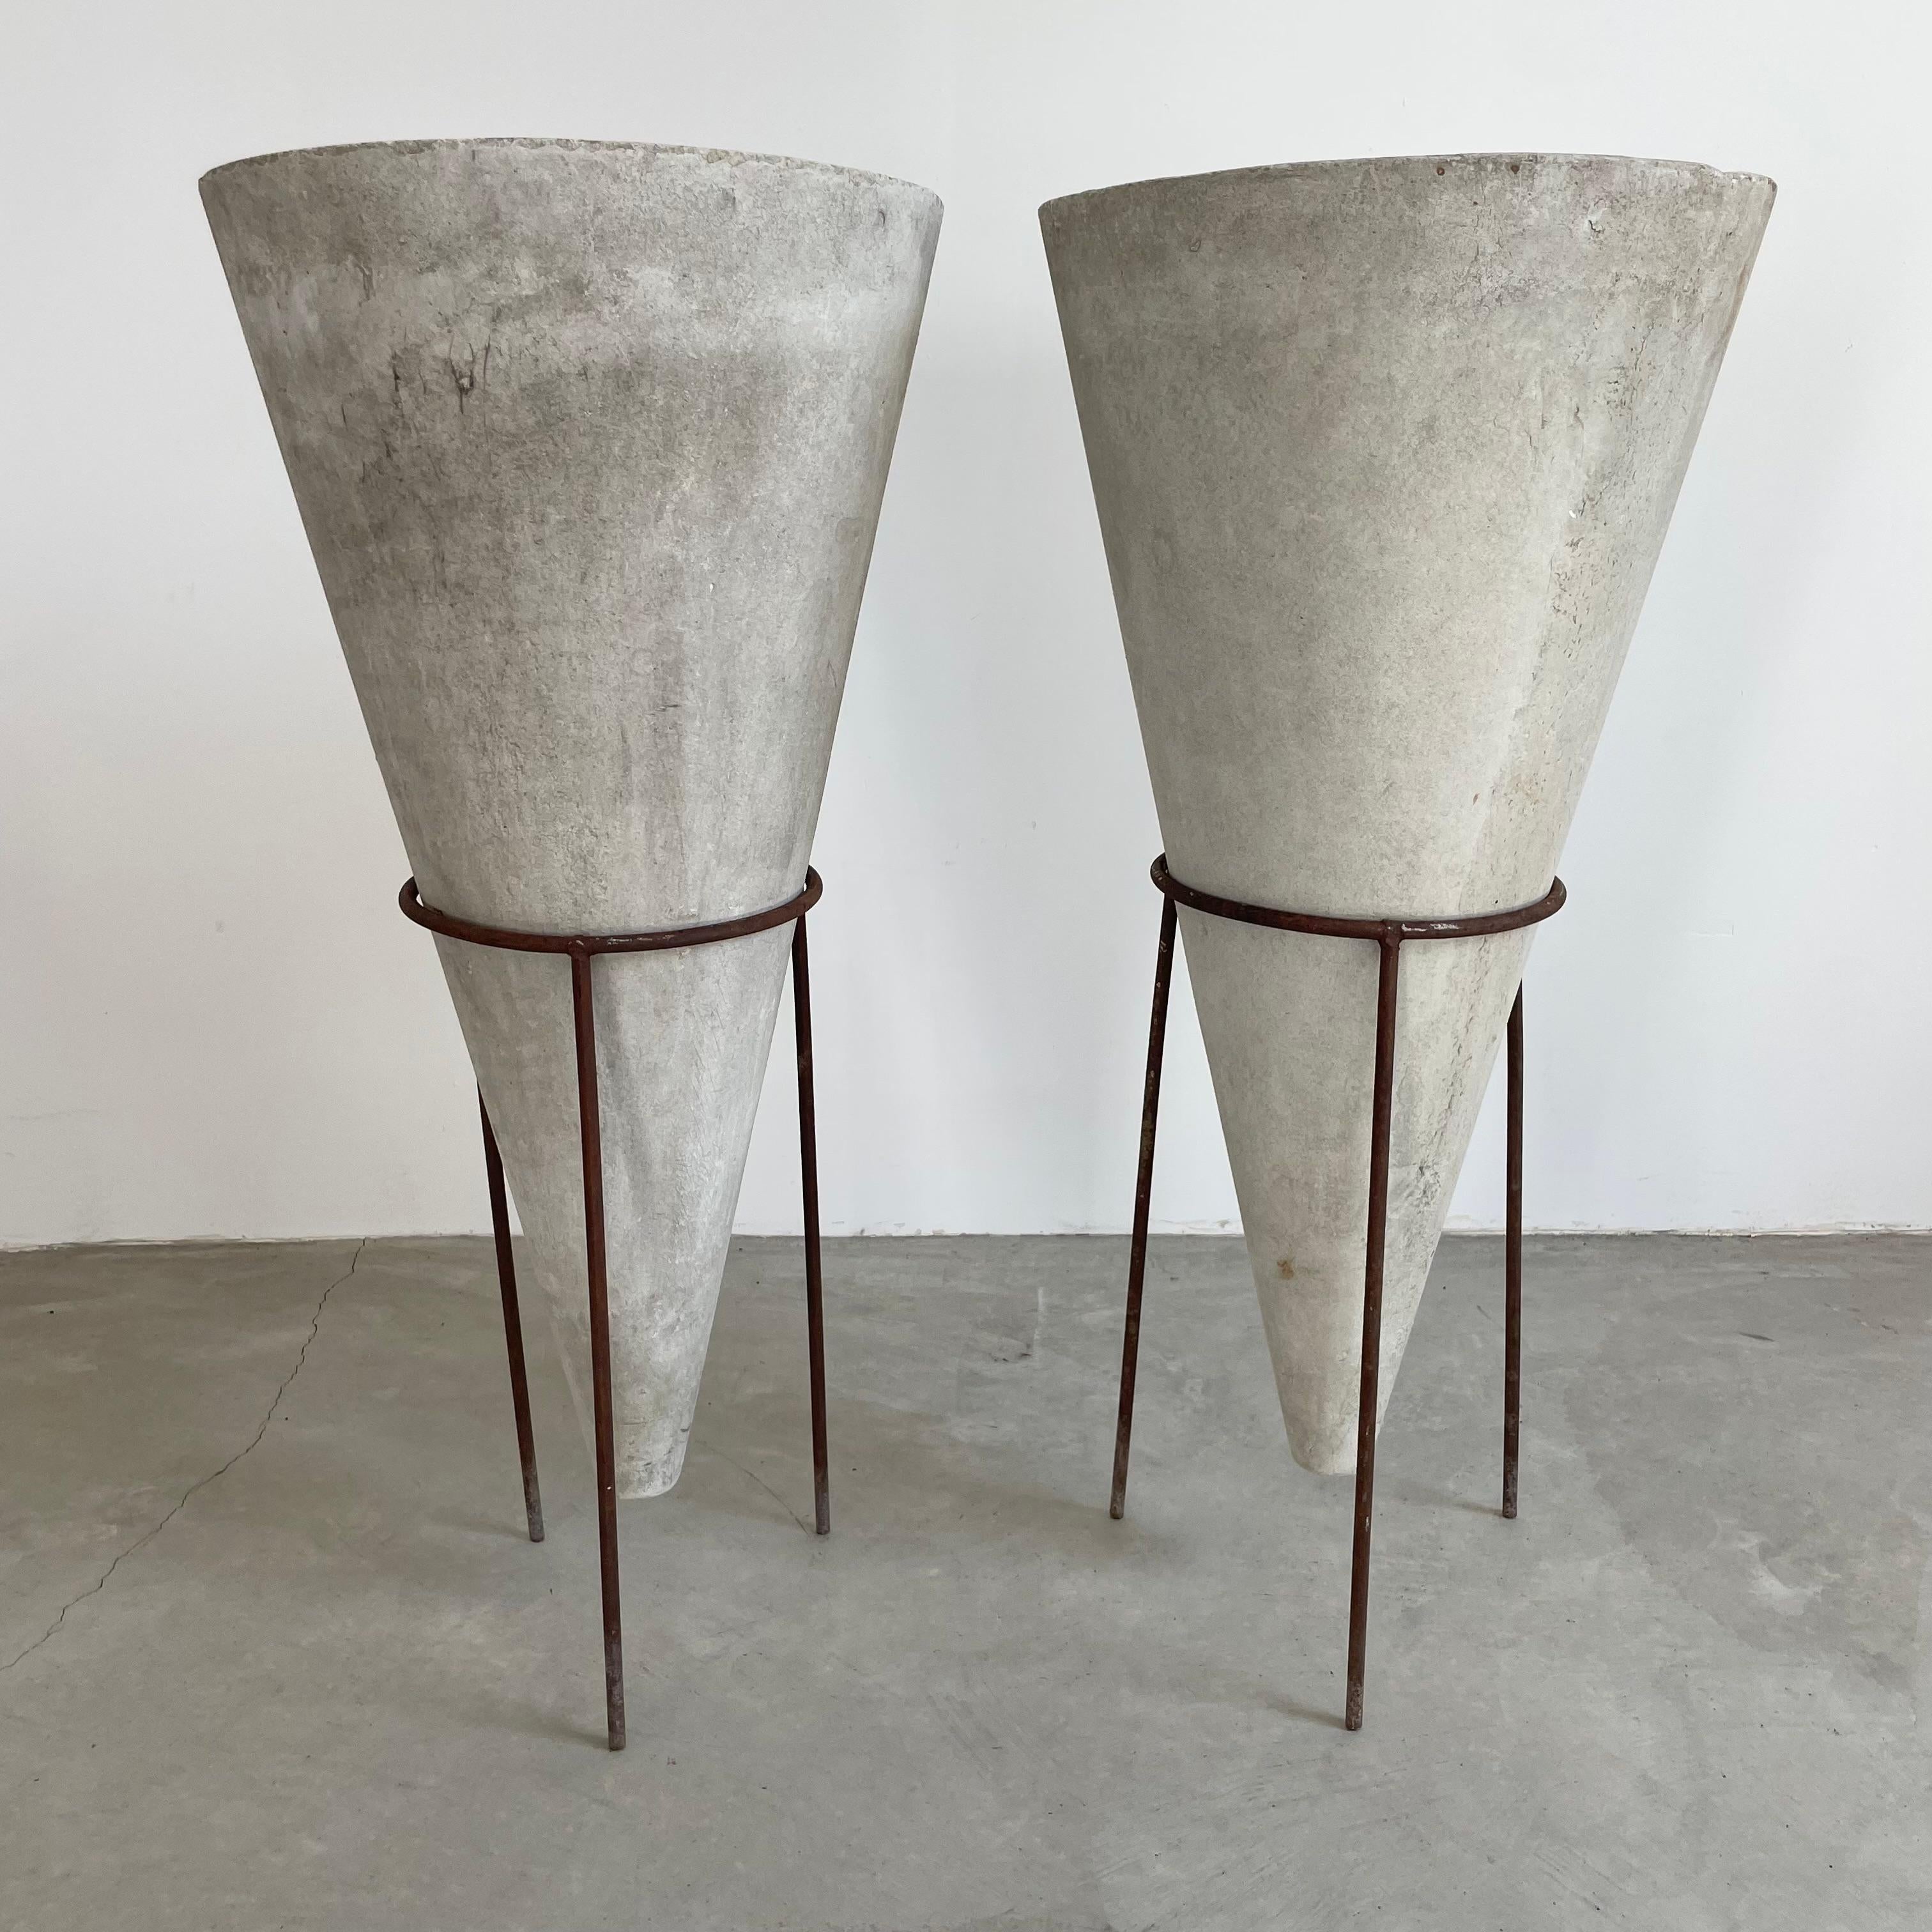 Modern Willy Guhl Concrete Cone Planter on Iron Stand, 1960s